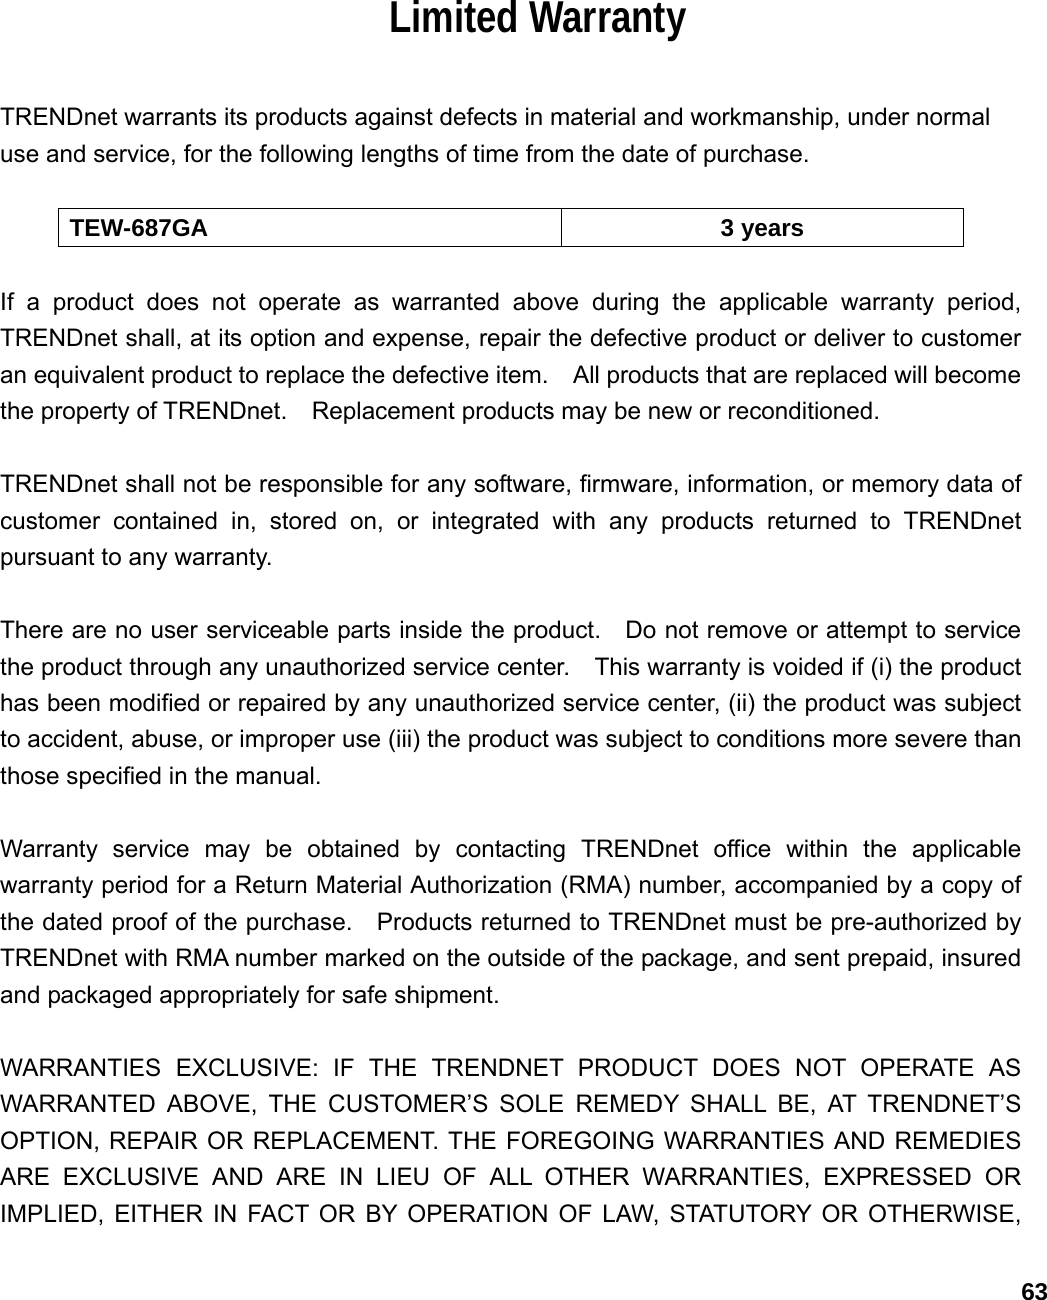                             63Limited Warranty  TRENDnet warrants its products against defects in material and workmanship, under normal use and service, for the following lengths of time from the date of purchase.      TEW-687GA 3 years  If a product does not operate as warranted above during the applicable warranty period, TRENDnet shall, at its option and expense, repair the defective product or deliver to customer an equivalent product to replace the defective item.    All products that are replaced will become the property of TRENDnet.    Replacement products may be new or reconditioned.  TRENDnet shall not be responsible for any software, firmware, information, or memory data of customer contained in, stored on, or integrated with any products returned to TRENDnet pursuant to any warranty.  There are no user serviceable parts inside the product.    Do not remove or attempt to service the product through any unauthorized service center.    This warranty is voided if (i) the product has been modified or repaired by any unauthorized service center, (ii) the product was subject to accident, abuse, or improper use (iii) the product was subject to conditions more severe than those specified in the manual.  Warranty service may be obtained by contacting TRENDnet office within the applicable warranty period for a Return Material Authorization (RMA) number, accompanied by a copy of the dated proof of the purchase.    Products returned to TRENDnet must be pre-authorized by TRENDnet with RMA number marked on the outside of the package, and sent prepaid, insured and packaged appropriately for safe shipment.      WARRANTIES EXCLUSIVE: IF THE TRENDNET PRODUCT DOES NOT OPERATE AS WARRANTED ABOVE, THE CUSTOMER’S SOLE REMEDY SHALL BE, AT TRENDNET’S OPTION, REPAIR OR REPLACEMENT. THE FOREGOING WARRANTIES AND REMEDIES ARE EXCLUSIVE AND ARE IN LIEU OF ALL OTHER WARRANTIES, EXPRESSED OR IMPLIED, EITHER IN FACT OR BY OPERATION OF LAW, STATUTORY OR OTHERWISE, 